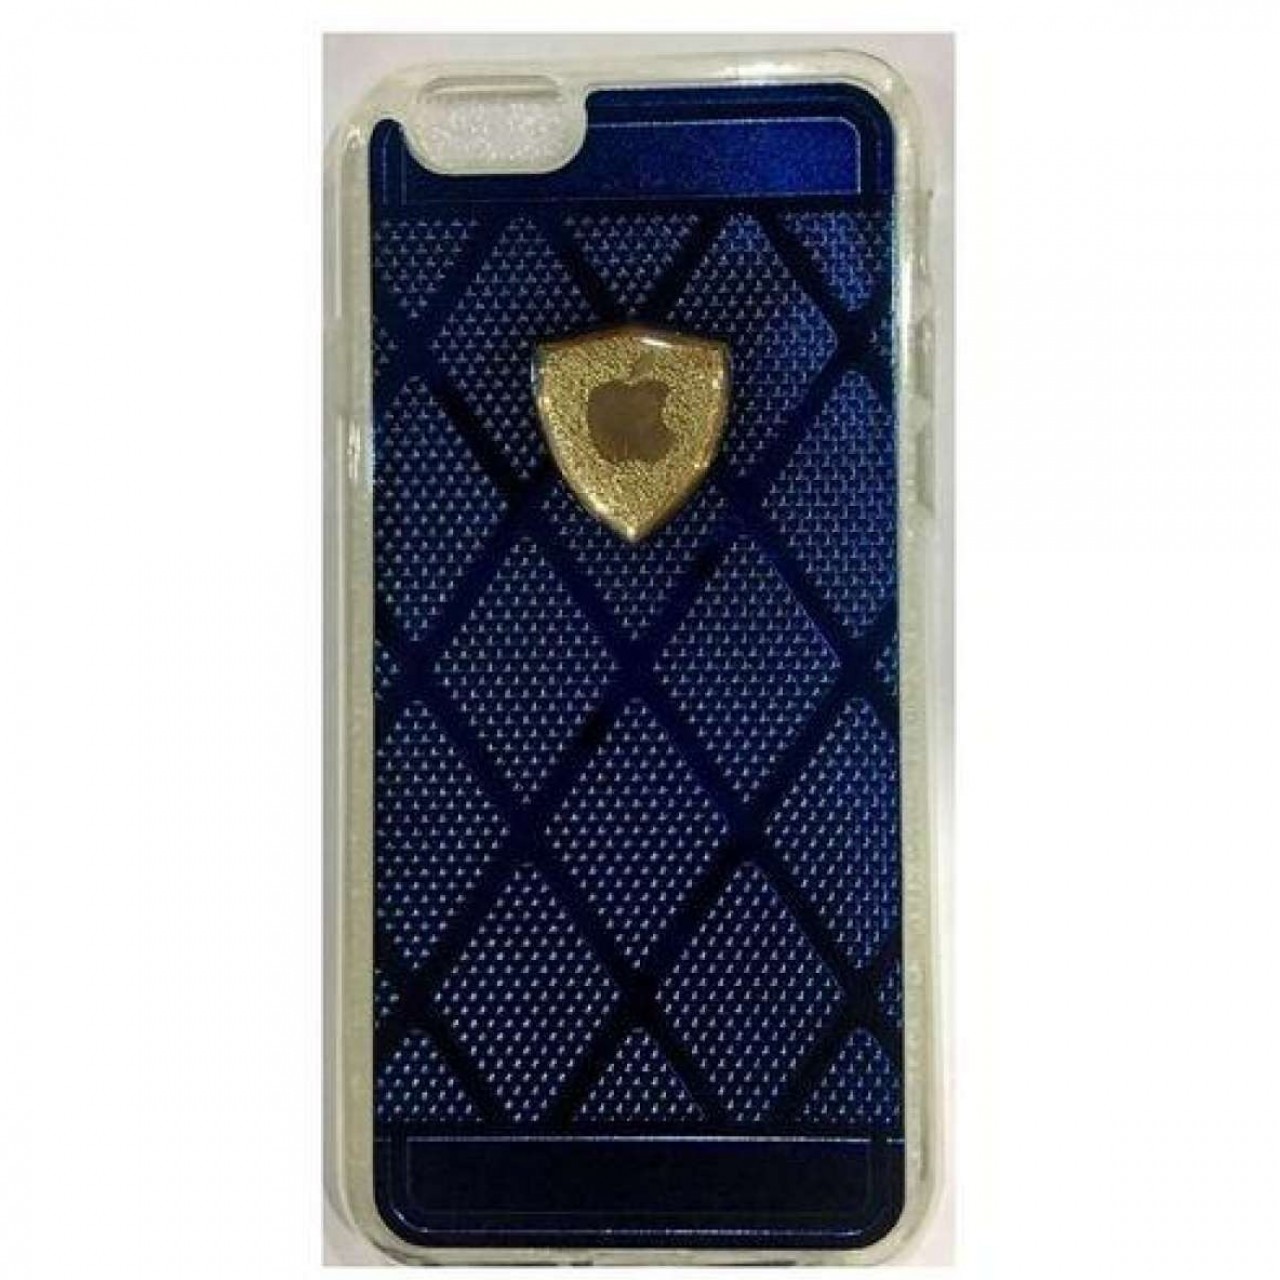 Back Cover For Iphone 6 & 6S - Blue